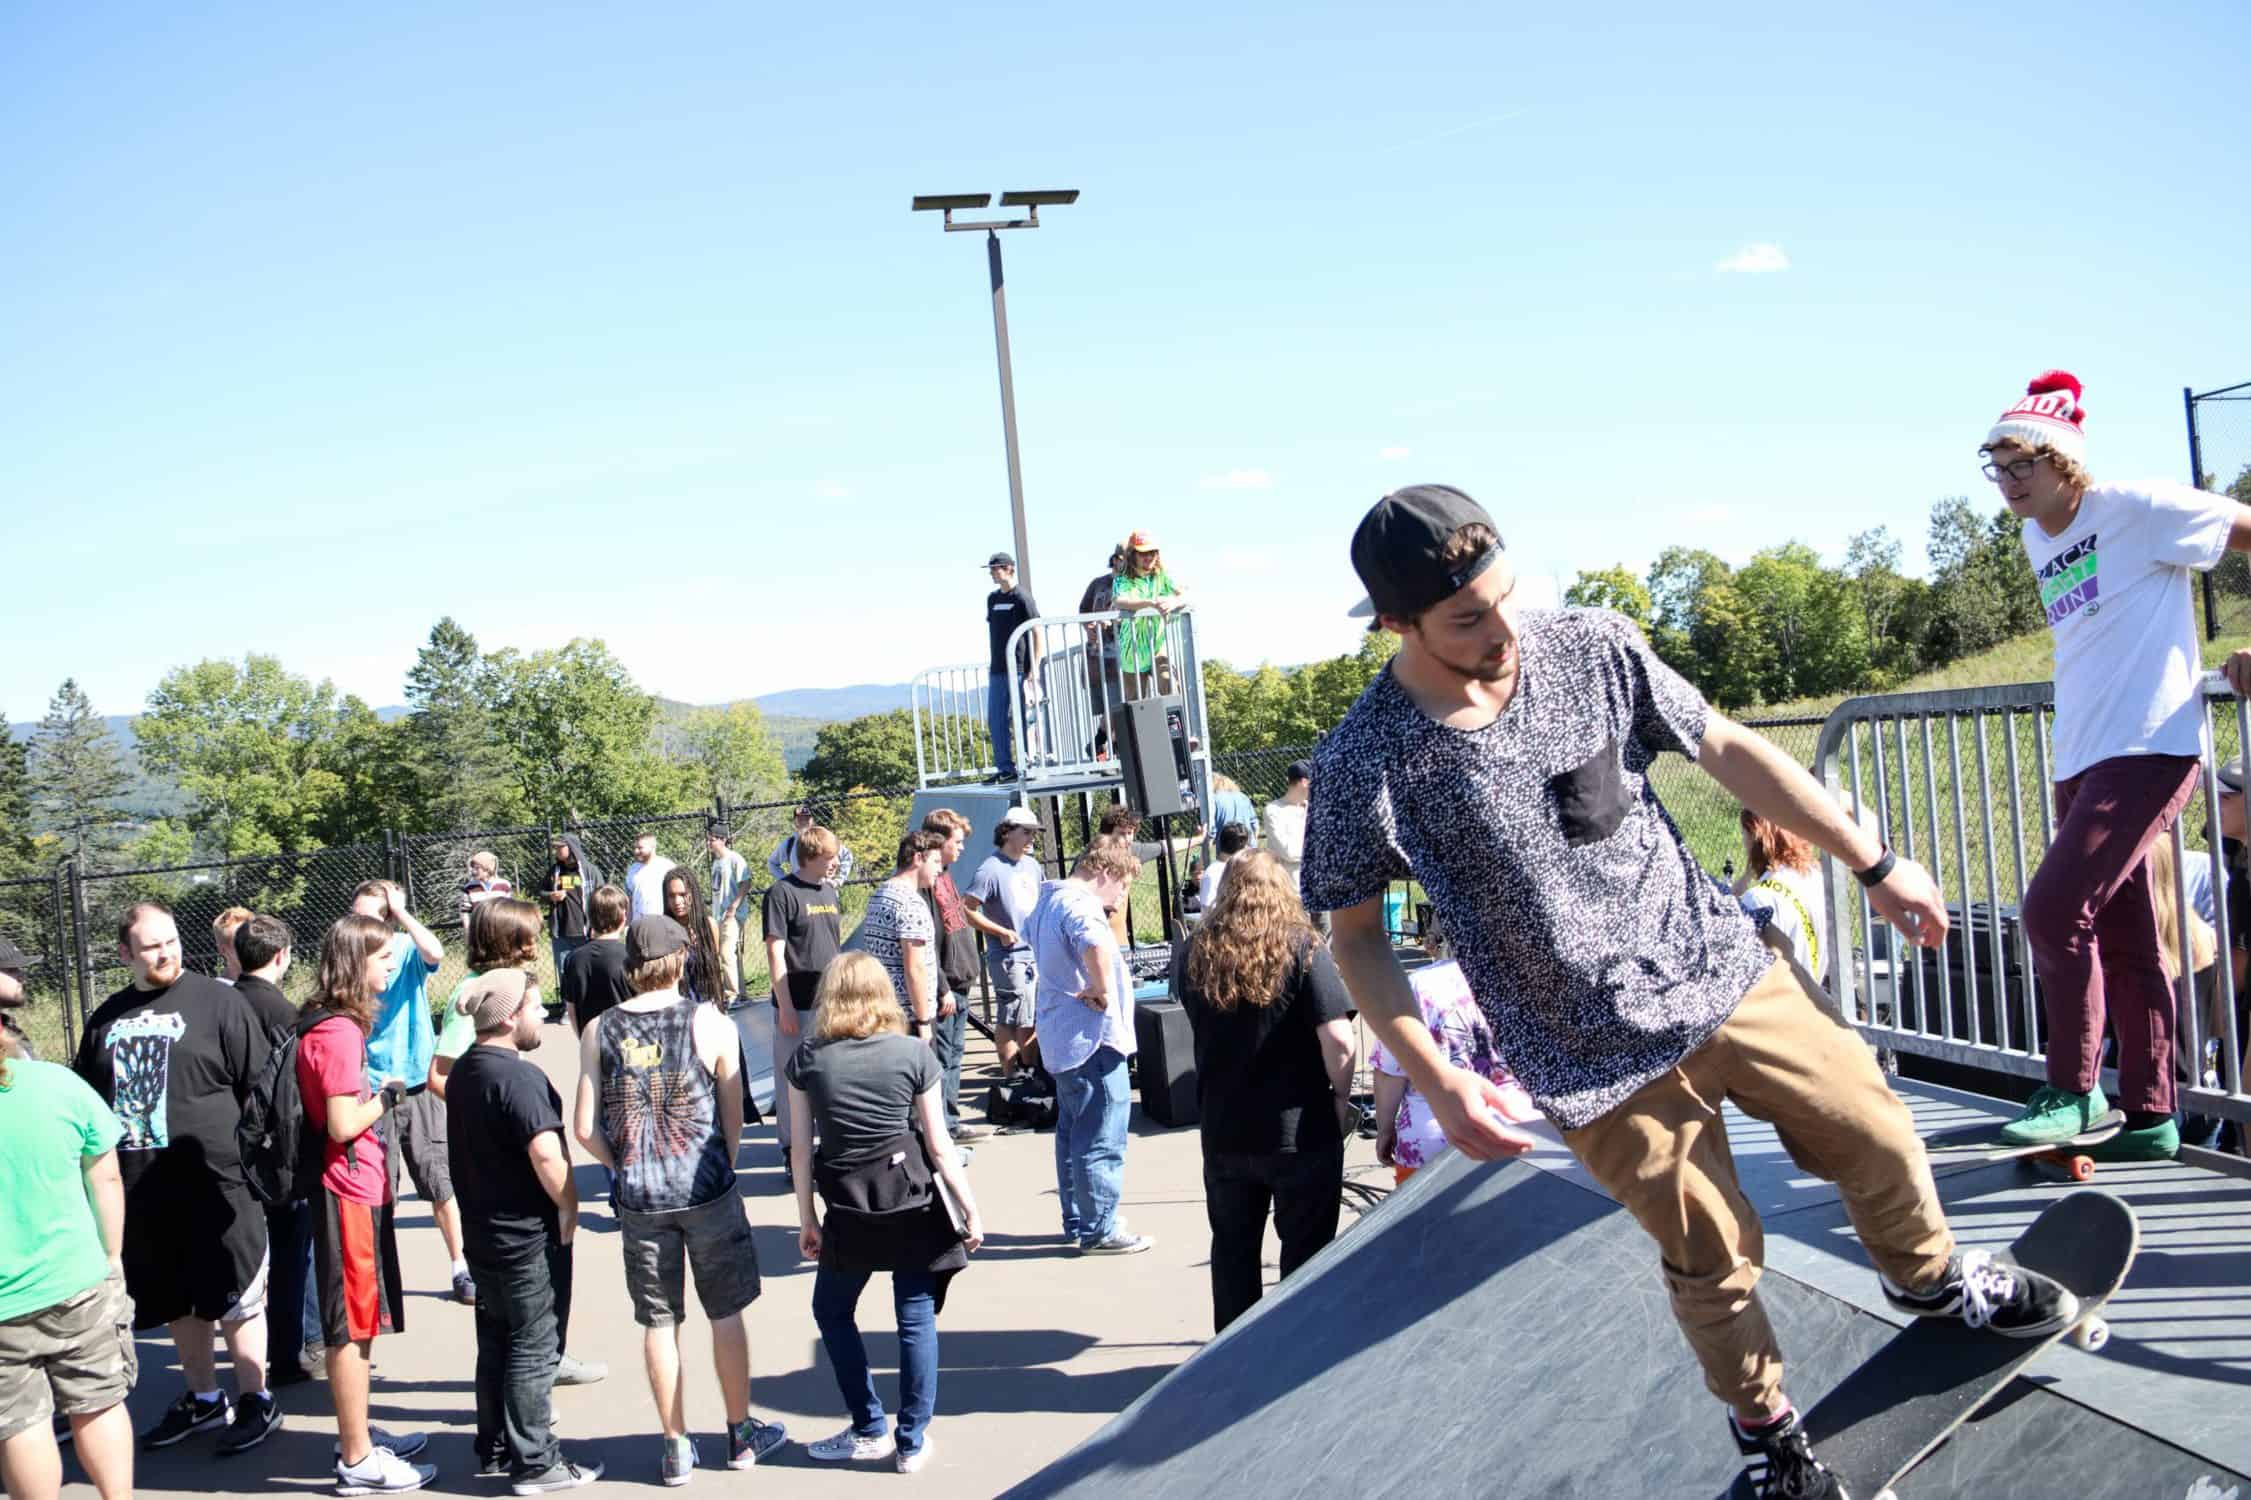 Group of students gather at the skate park